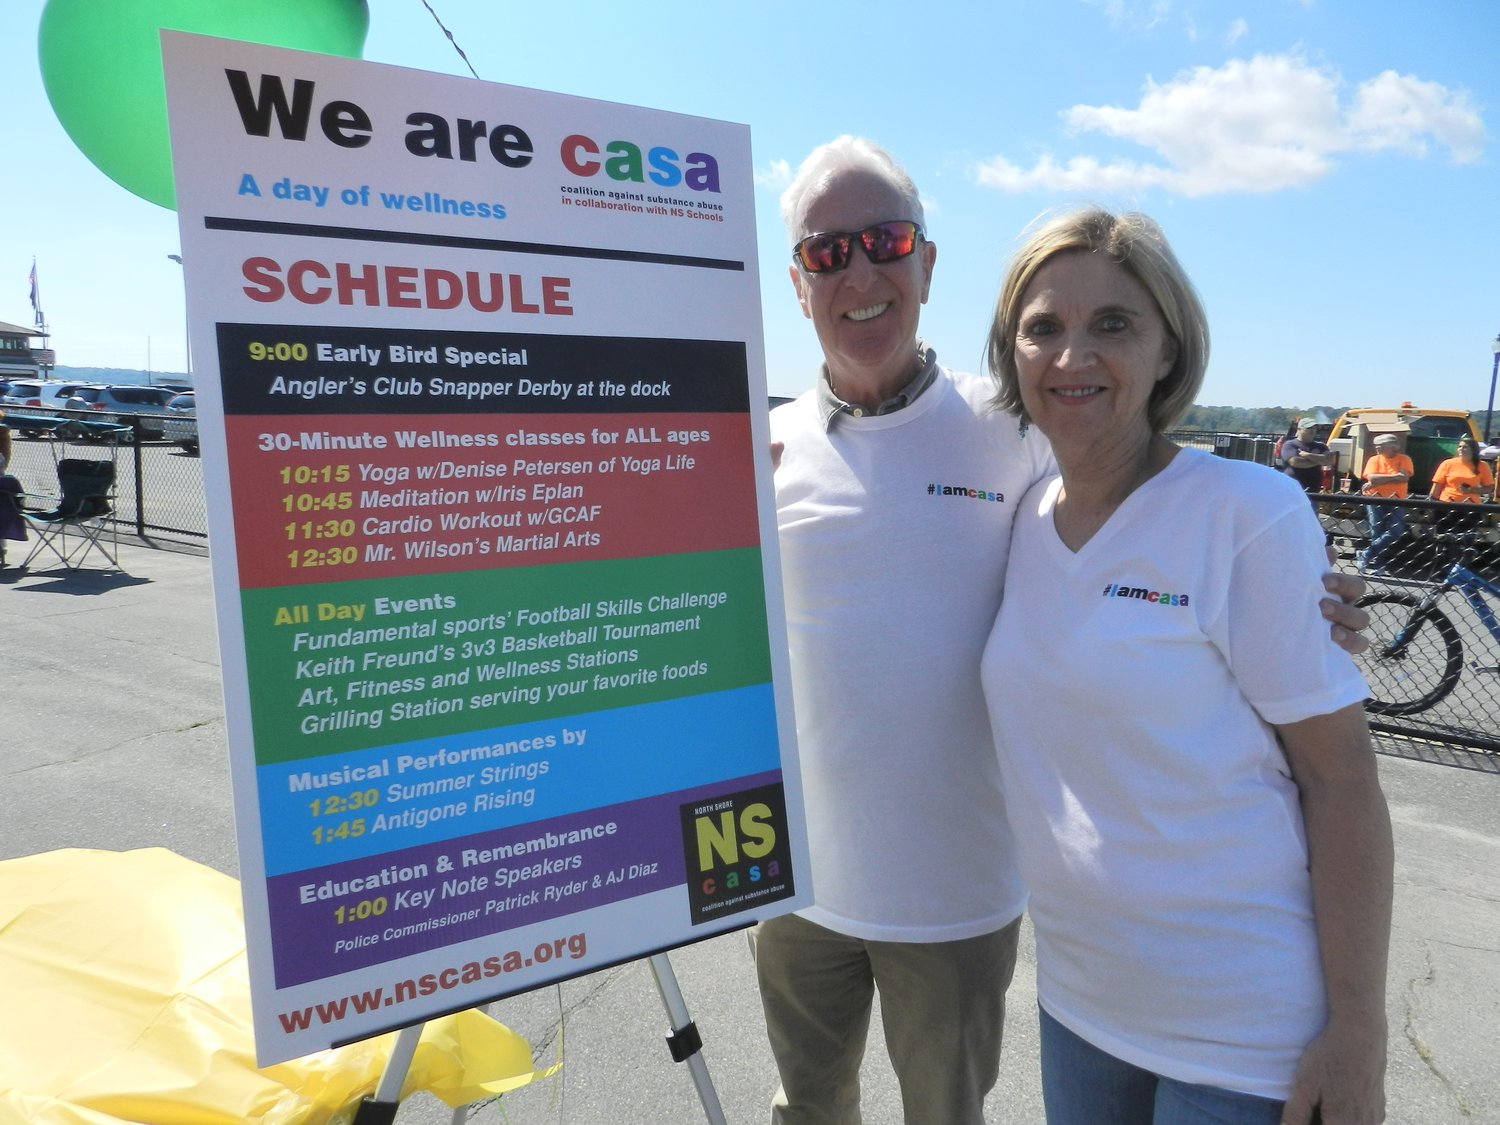 NSCASA’s executive director, Kevin McGilloway, and his wife, Jane, sported “I am CASA” T-shirts at the Day of Wellness event.